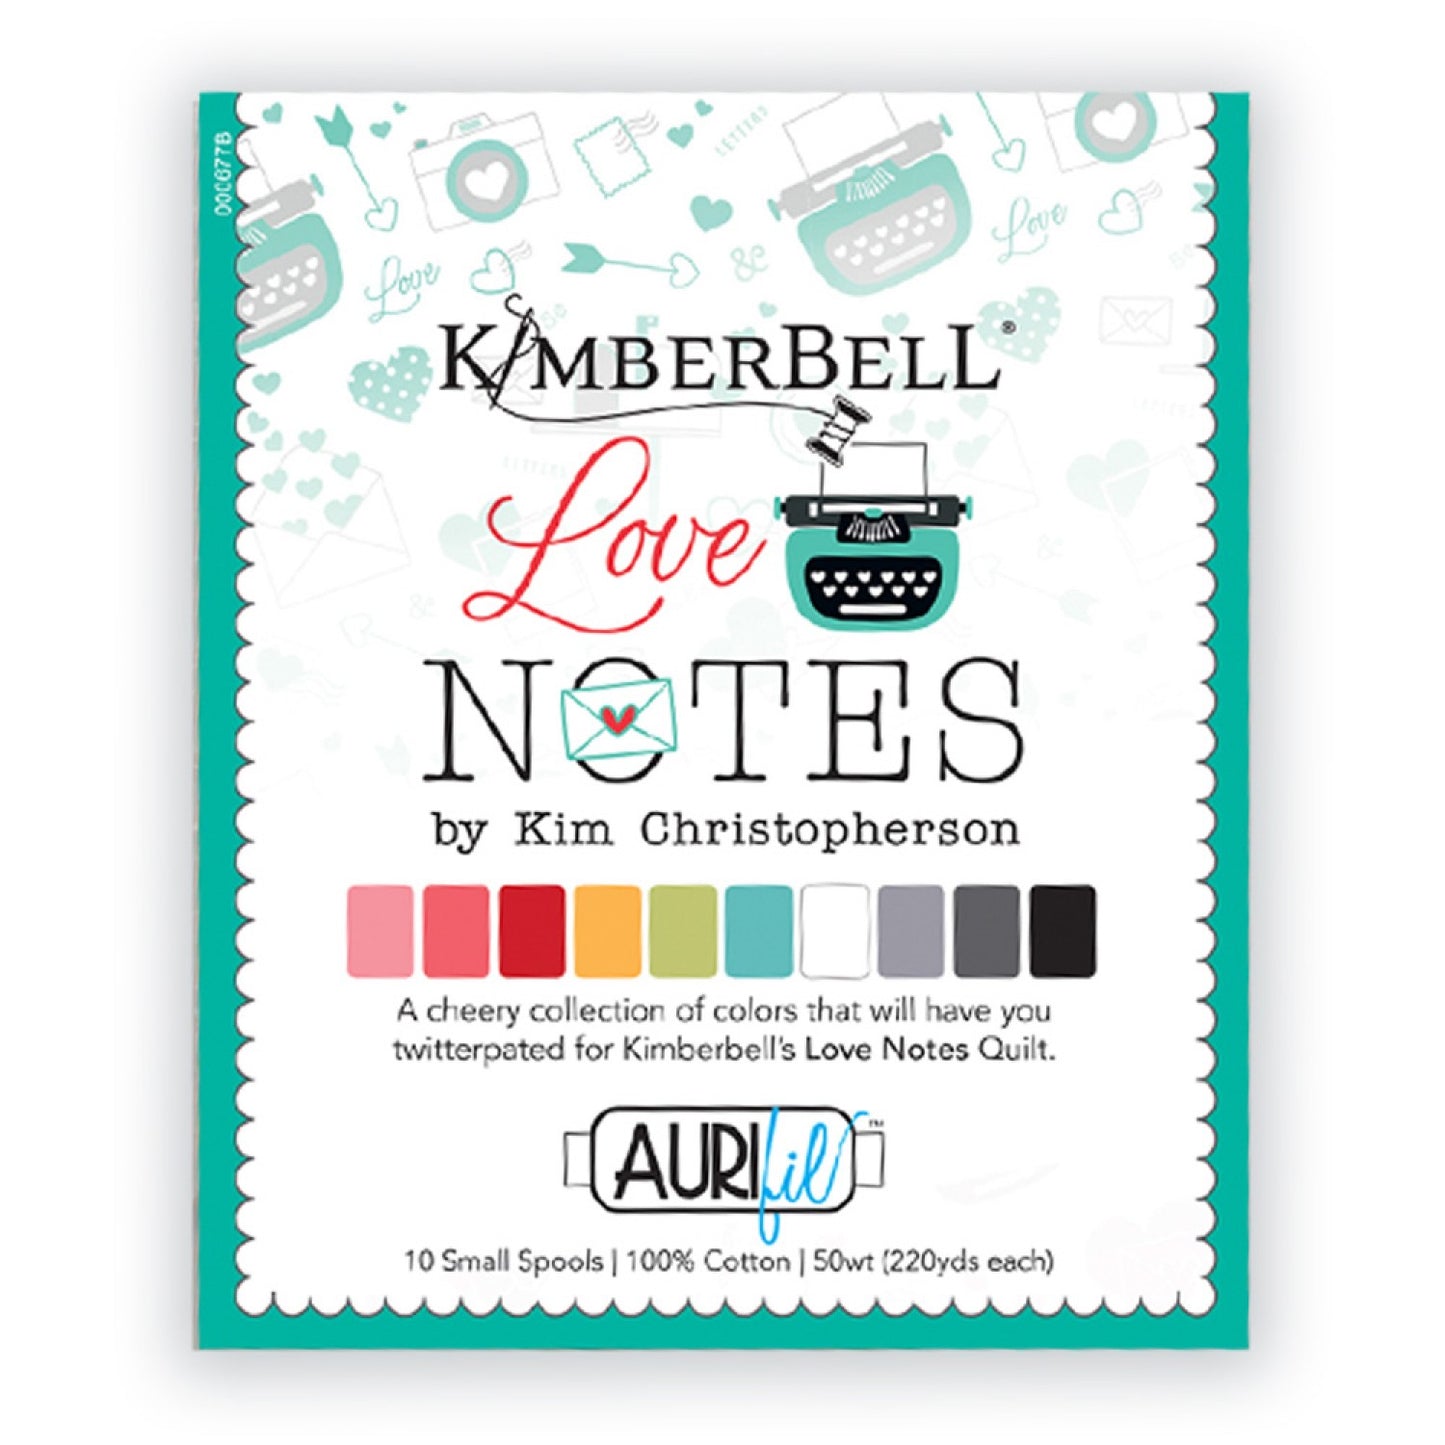 Aurifil Collection coordinates with Kimberbell Love Notes sewing pattern. Includes 10 small spools of colors 2425, 2530, 2250, 2130, 1231, 1148, 2024, 2606, 2630, 2692.